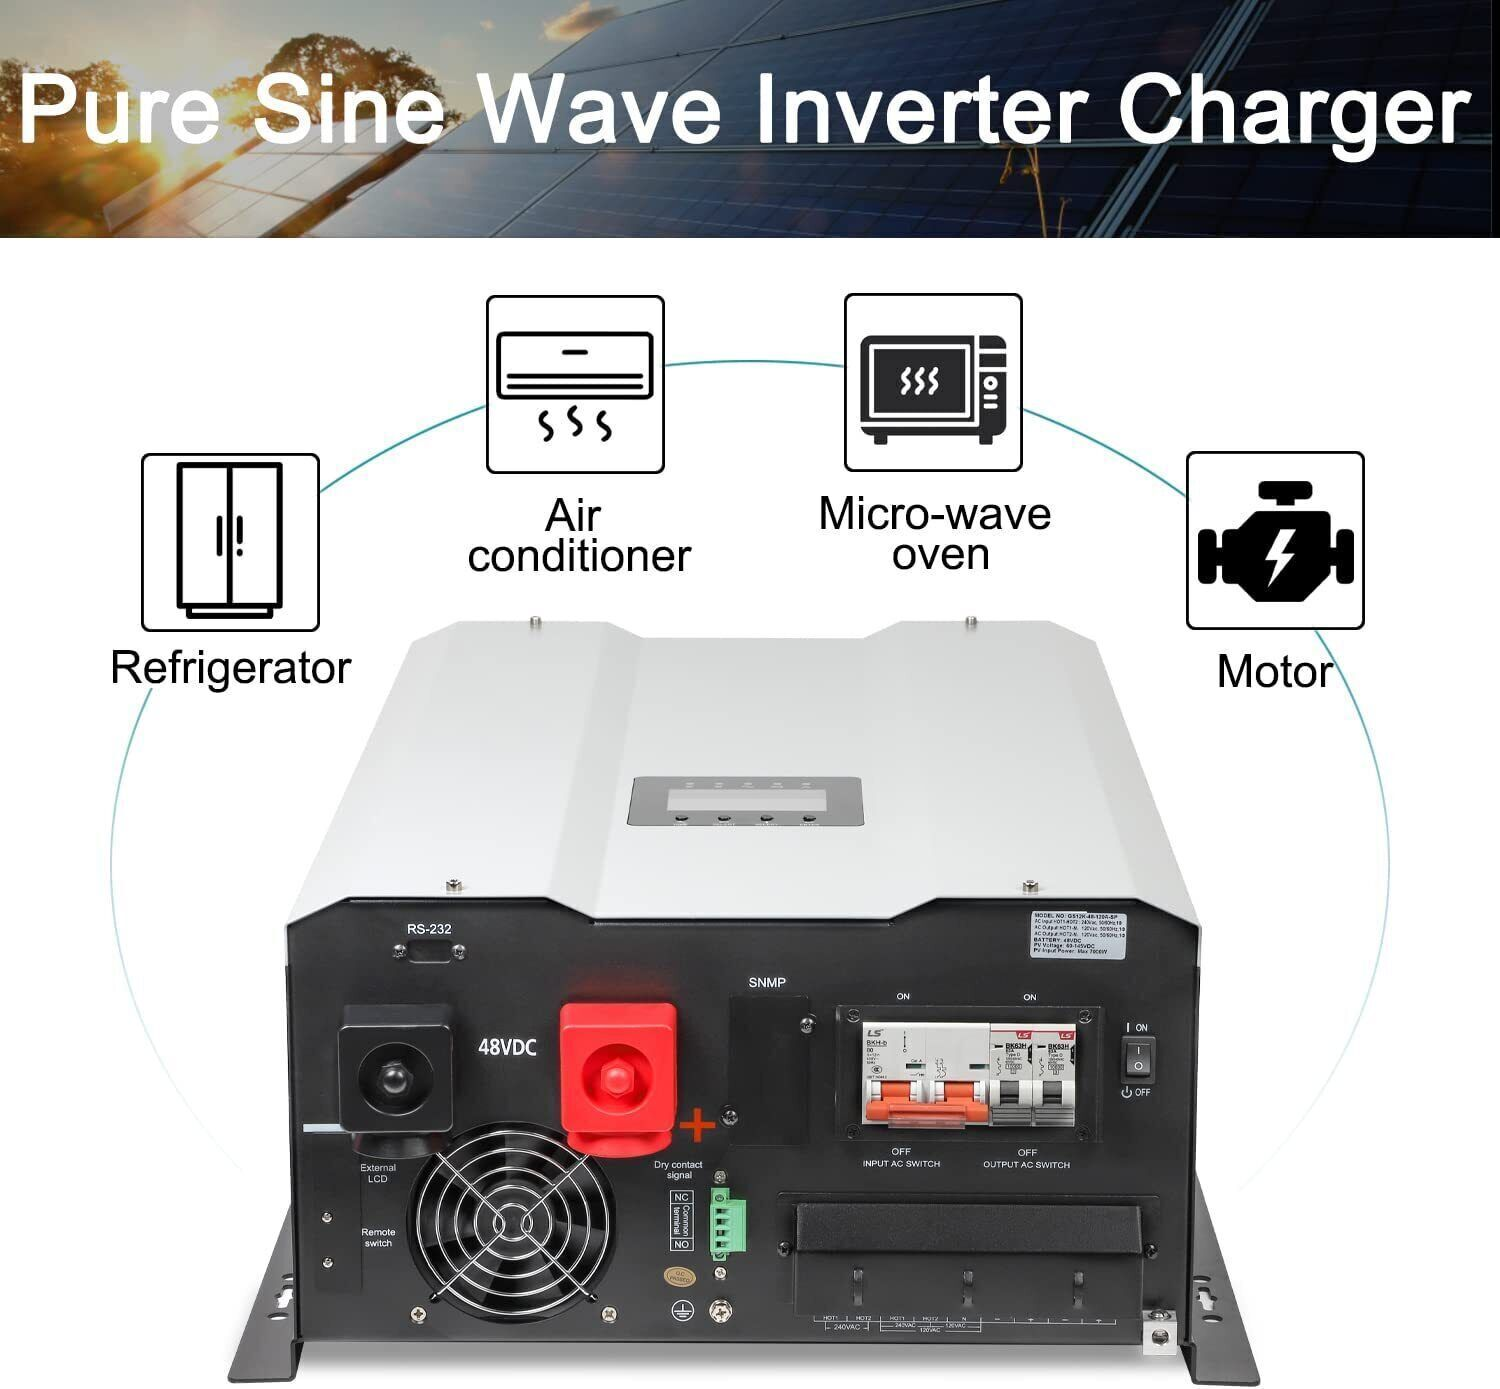 An image showing the 12v 3000w inverter with continuous output power for uninterrupted electricity supply.